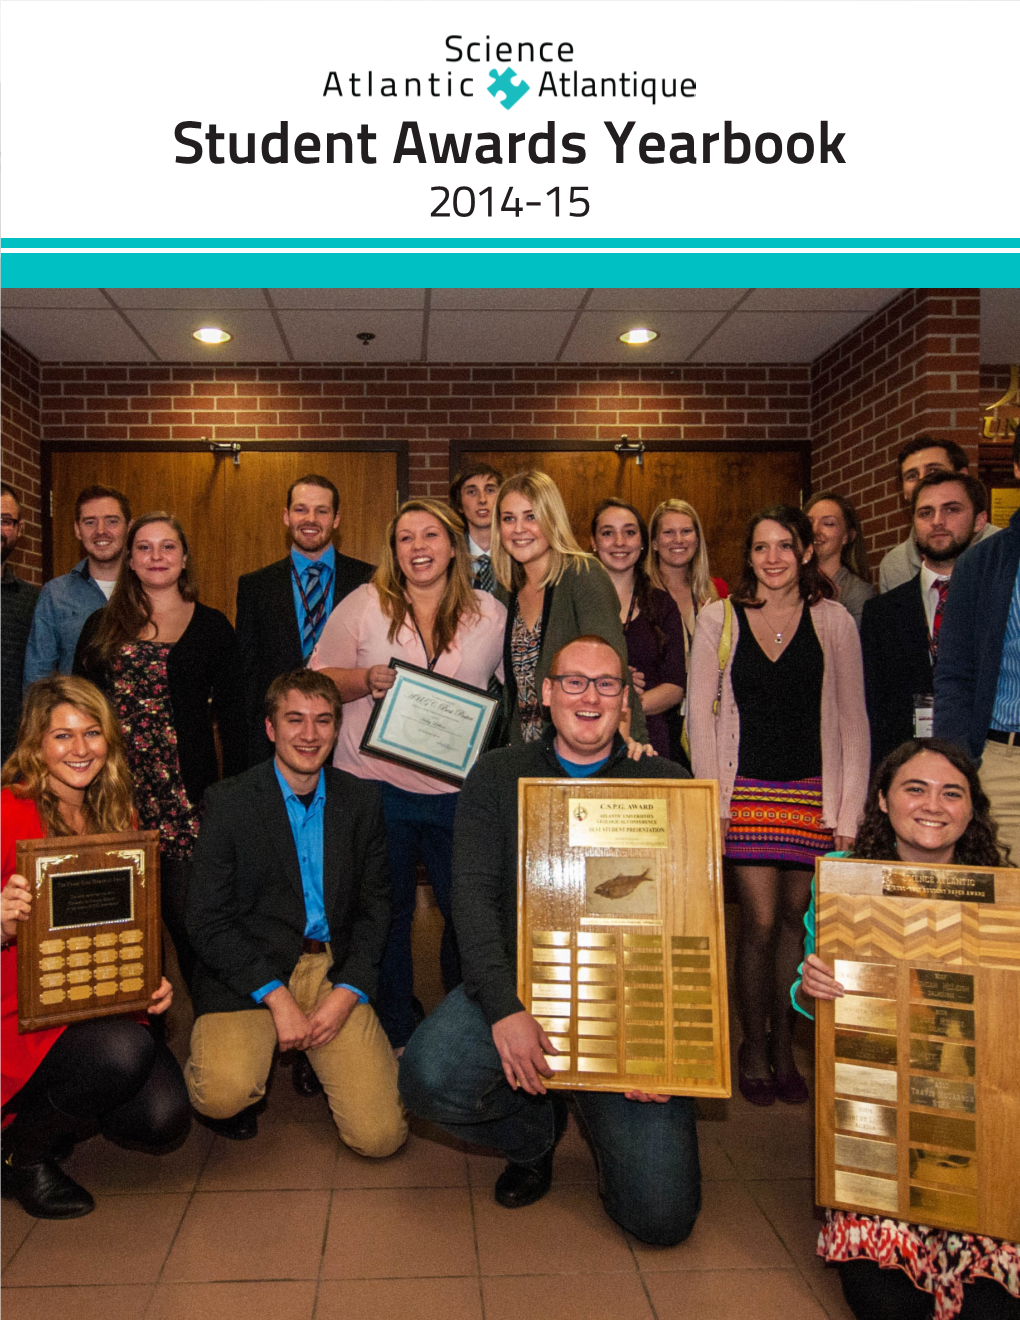 Student Awards Yearbook 2014-15 Introduction